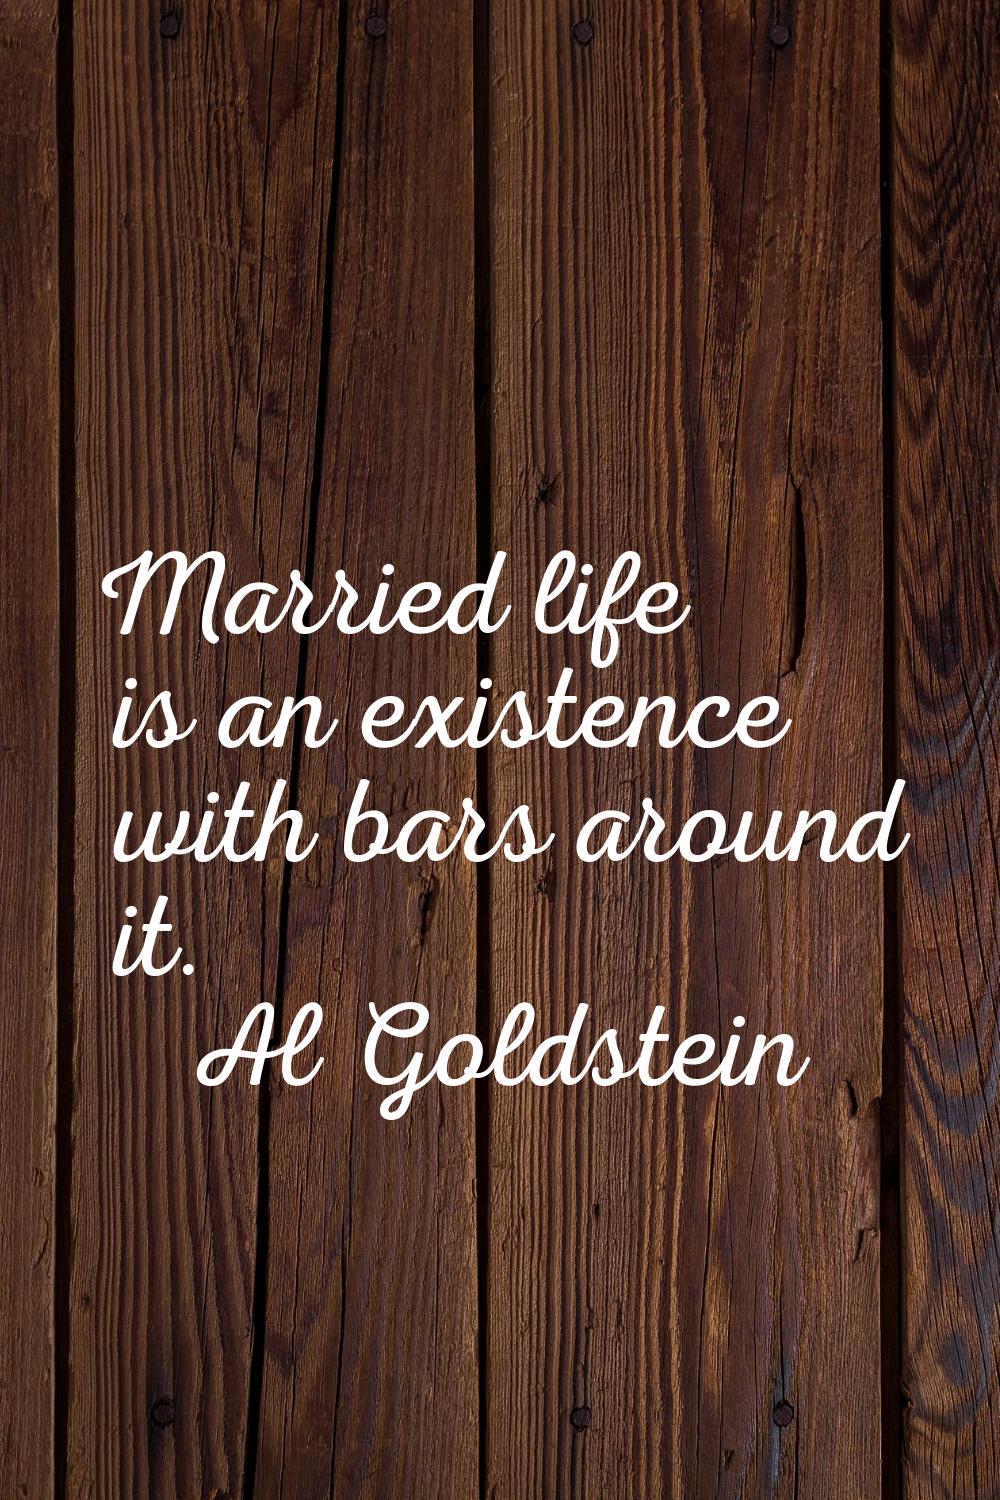 Married life is an existence with bars around it.